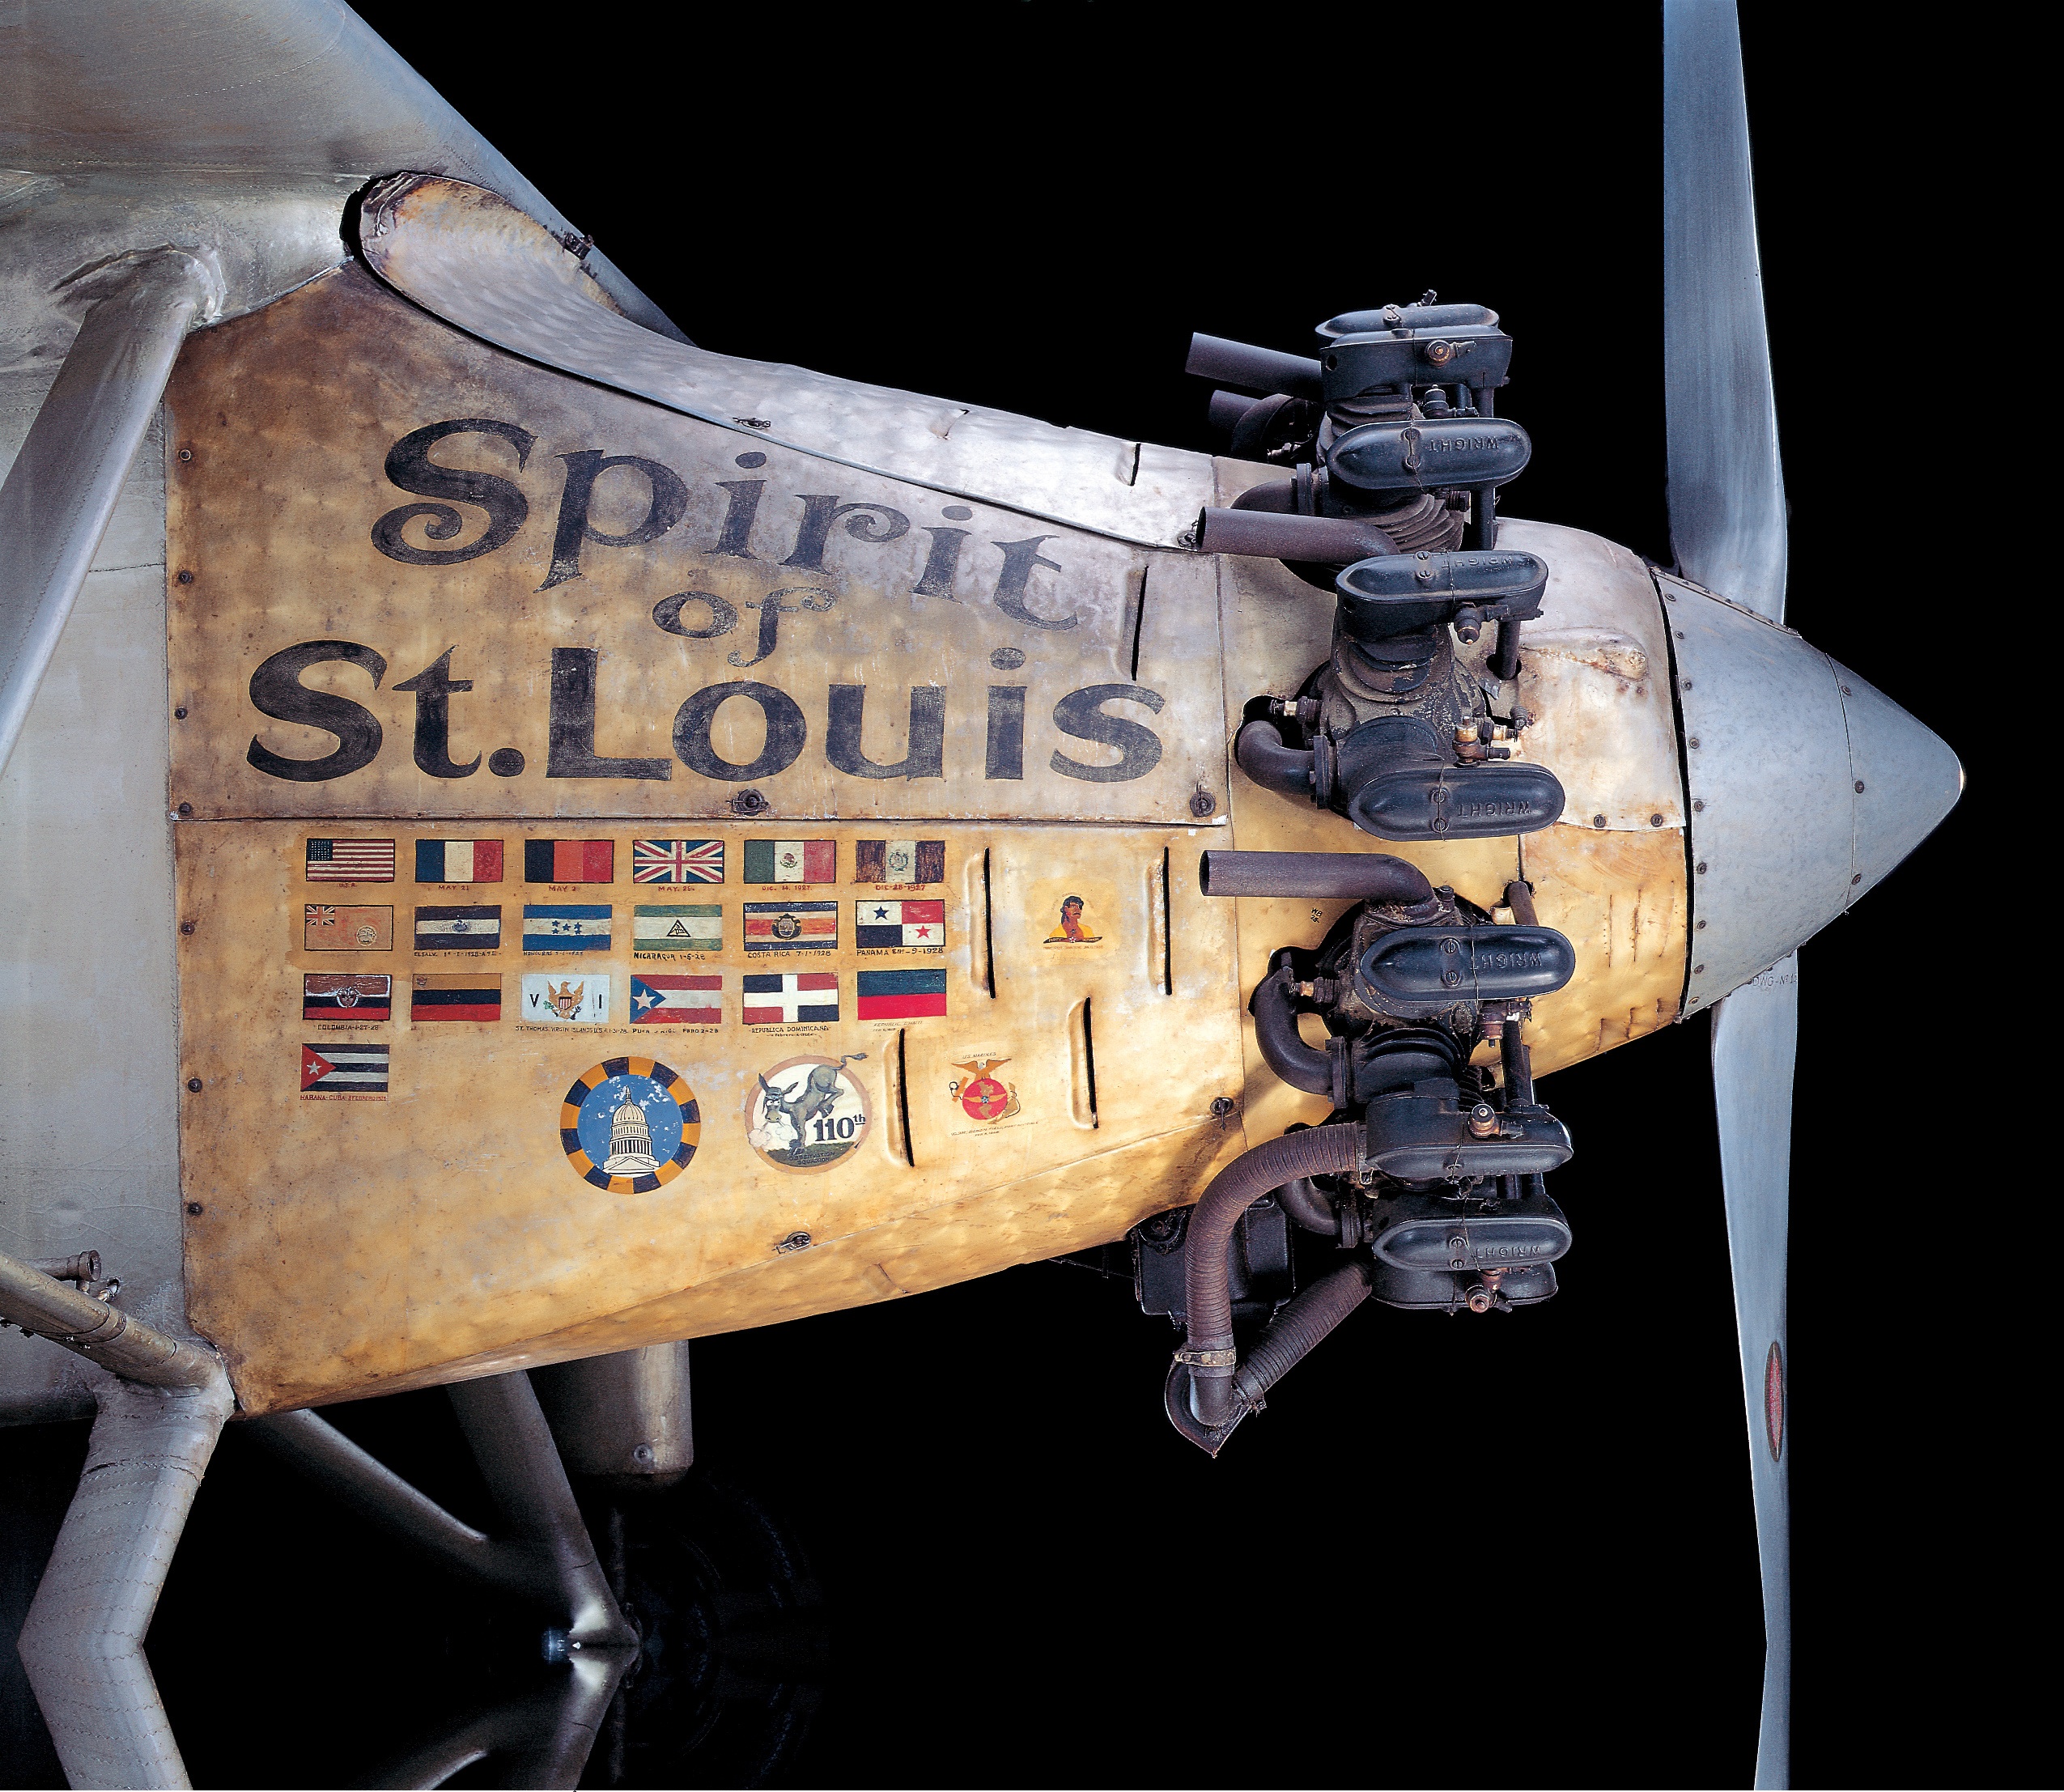 An Inside Look at the Spirit of St. Louis , Air & Space Magazine